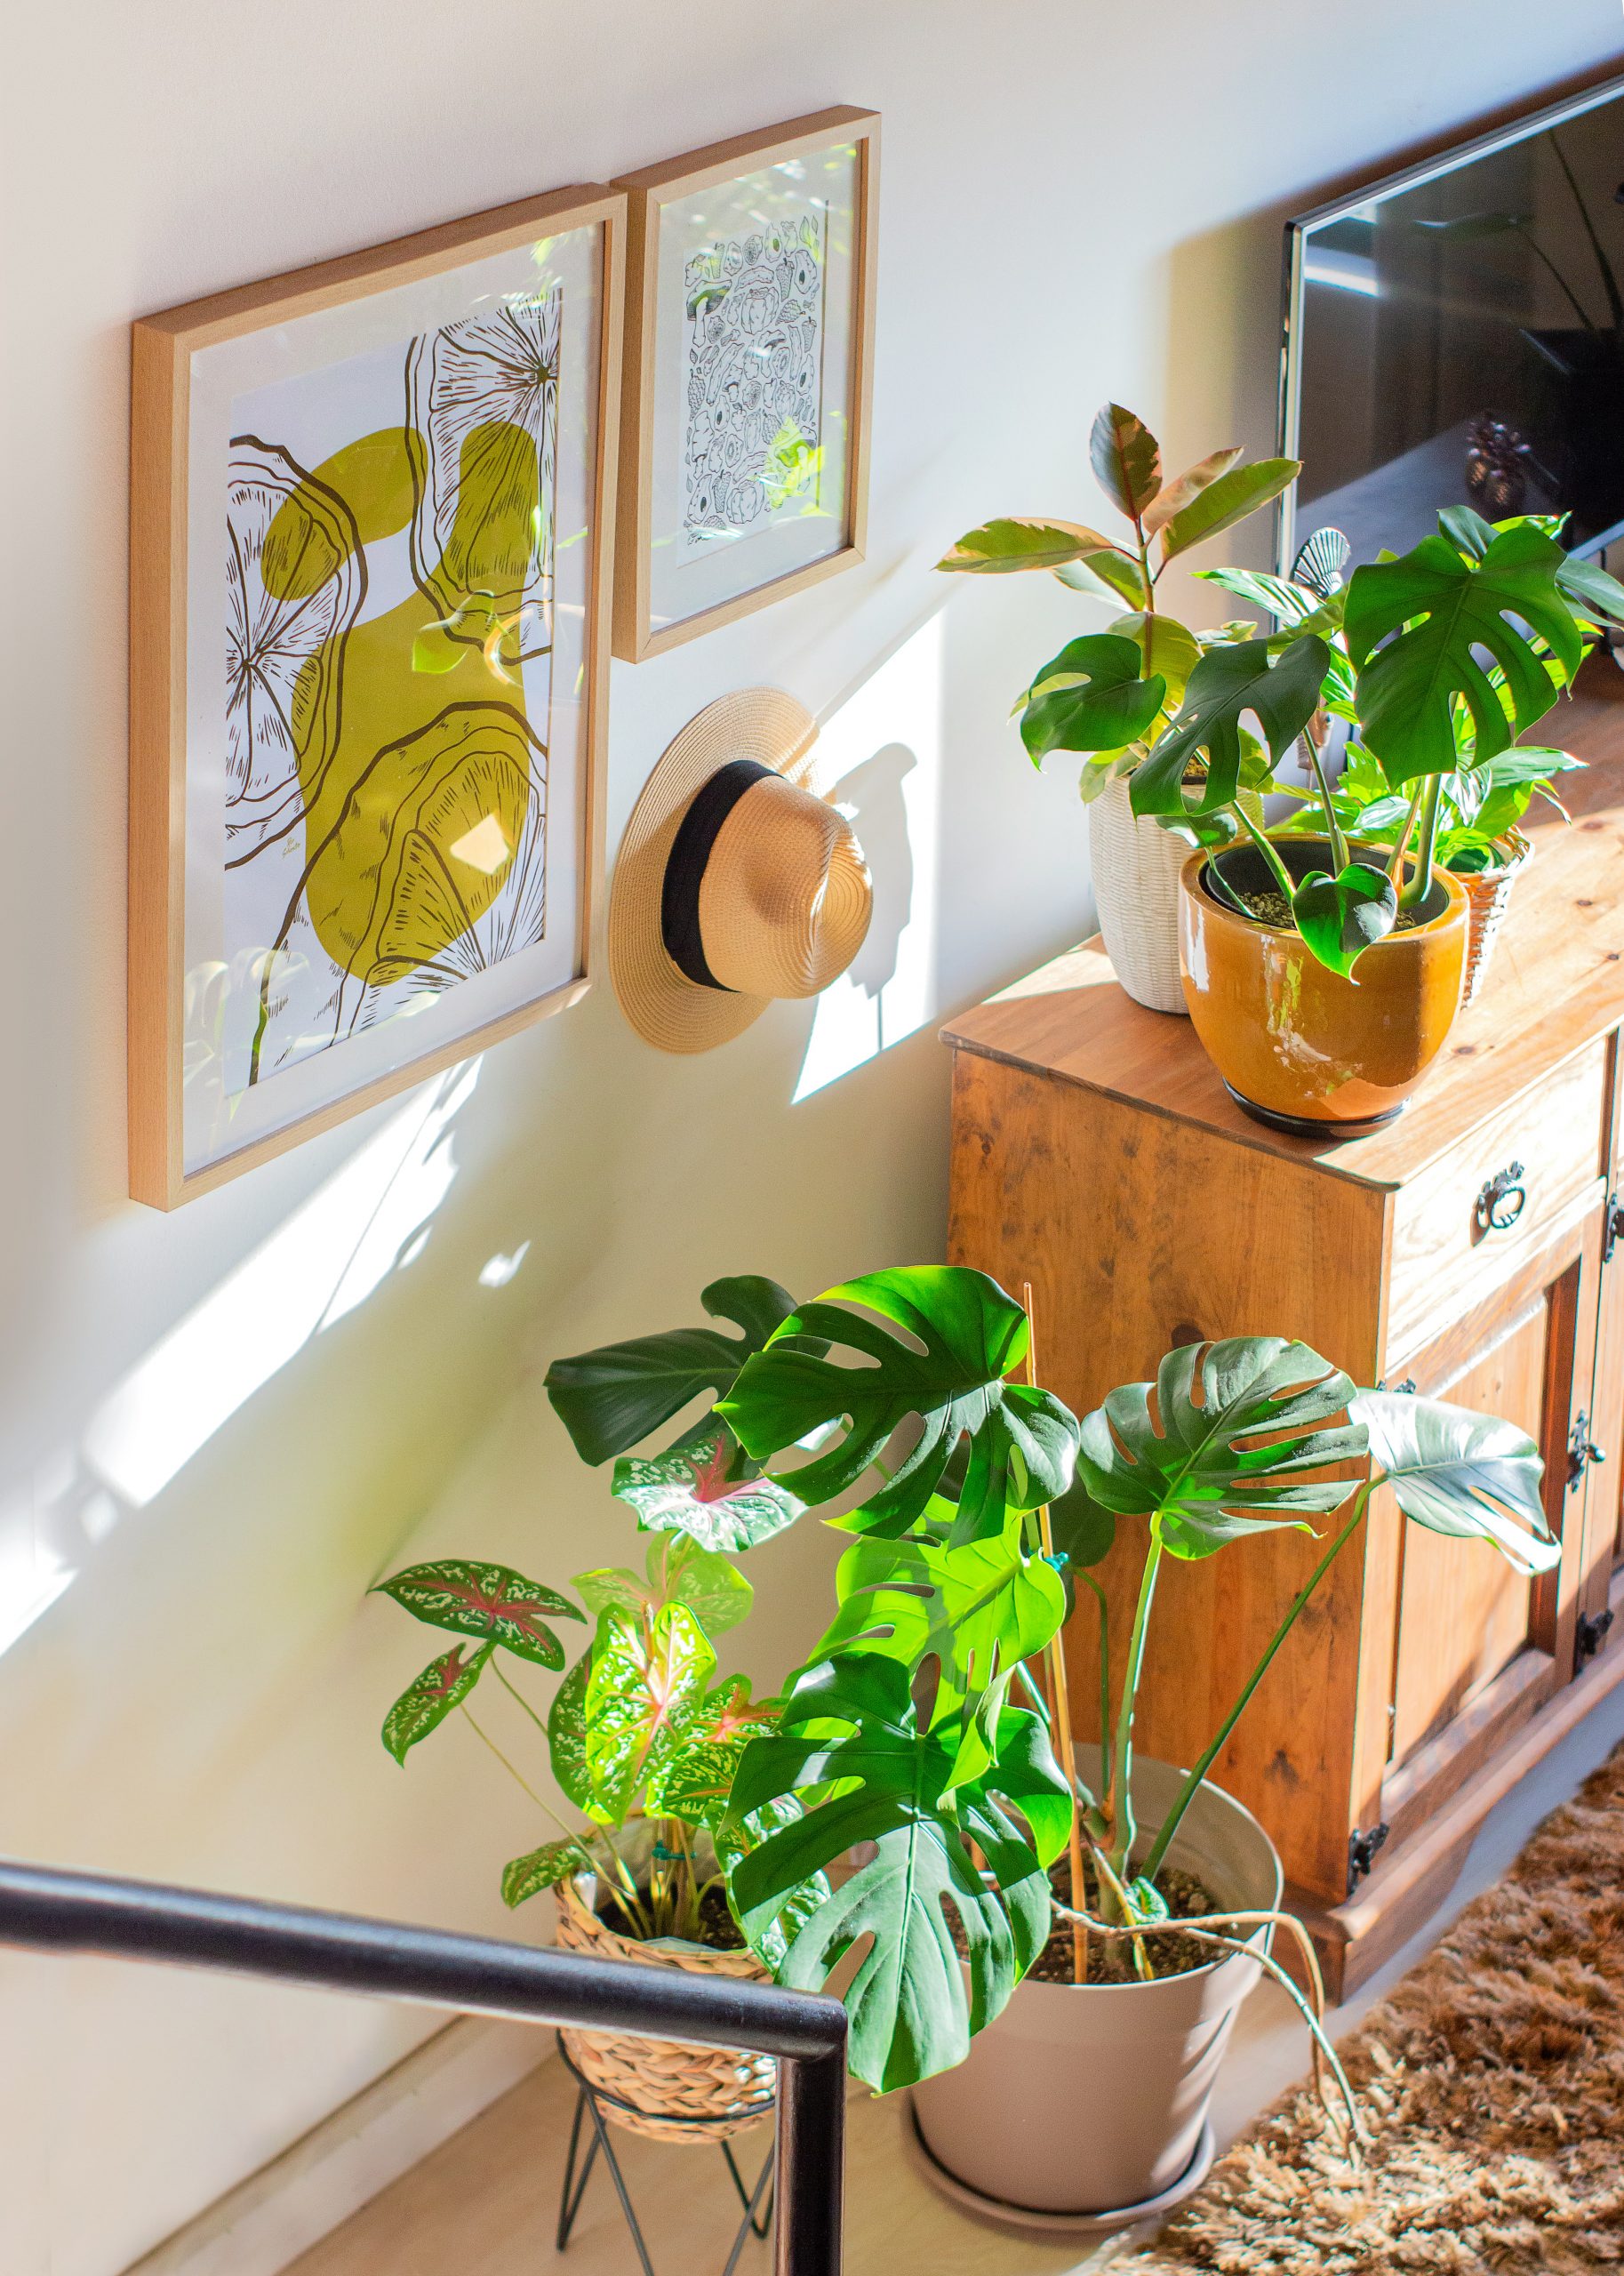 Cozy interior with green plants wall art and natural lighting